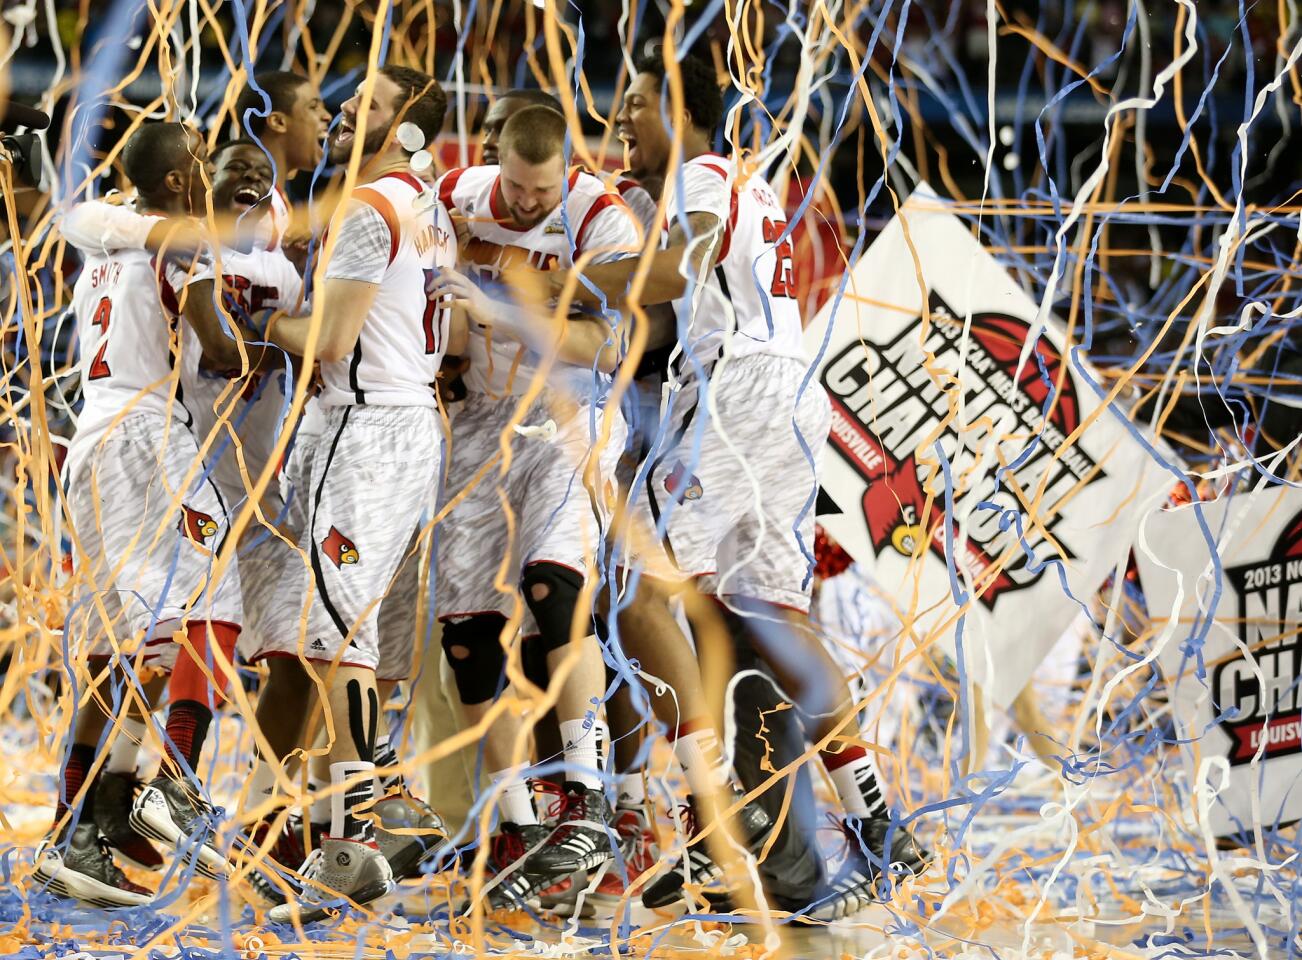 The Louisville Cardinals celebrate after they won 82–76 against the Michigan Wolverines during the 2013 NCAA Men's Final Four Championship at the Georgia Dome on April 8, 2013 in Atlanta, Georgia.